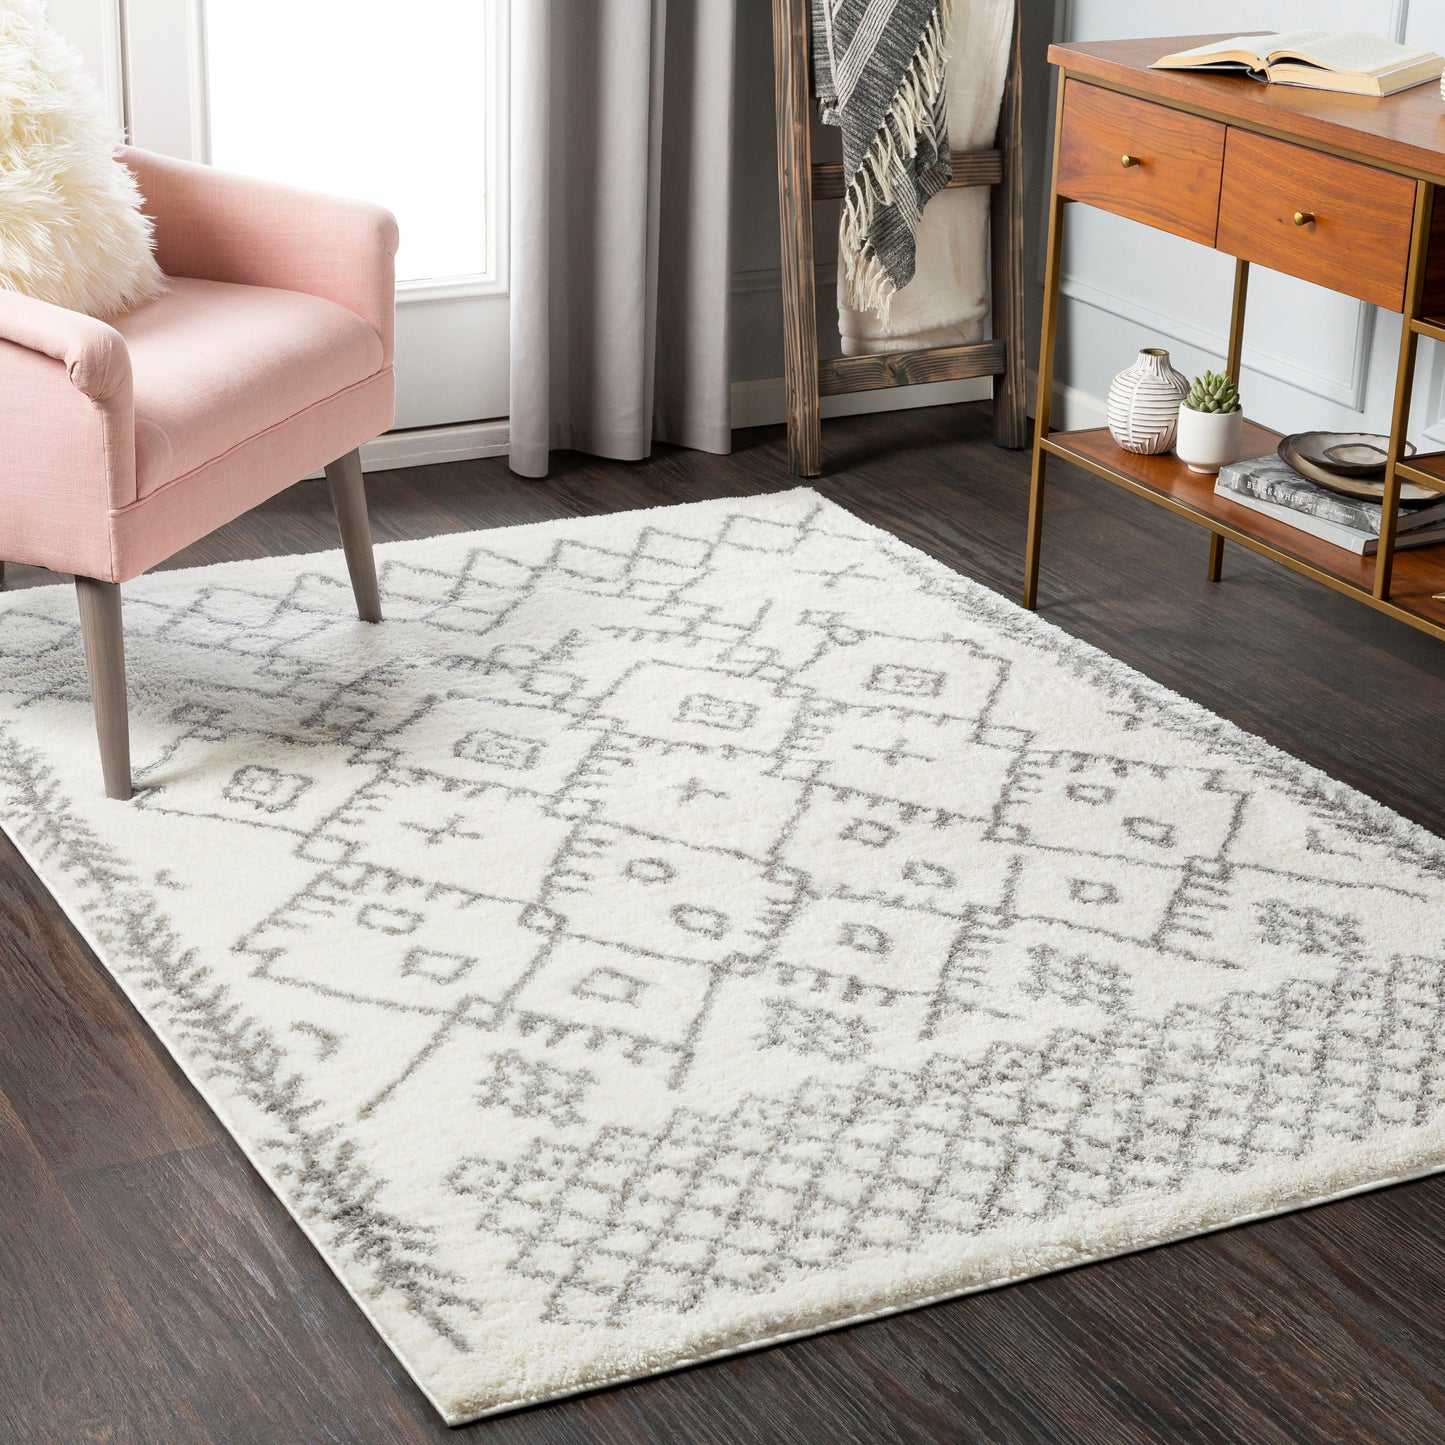 Aliyah shag 26308 Machine Woven Synthetic Blend Indoor Area Rug by Surya Rugs